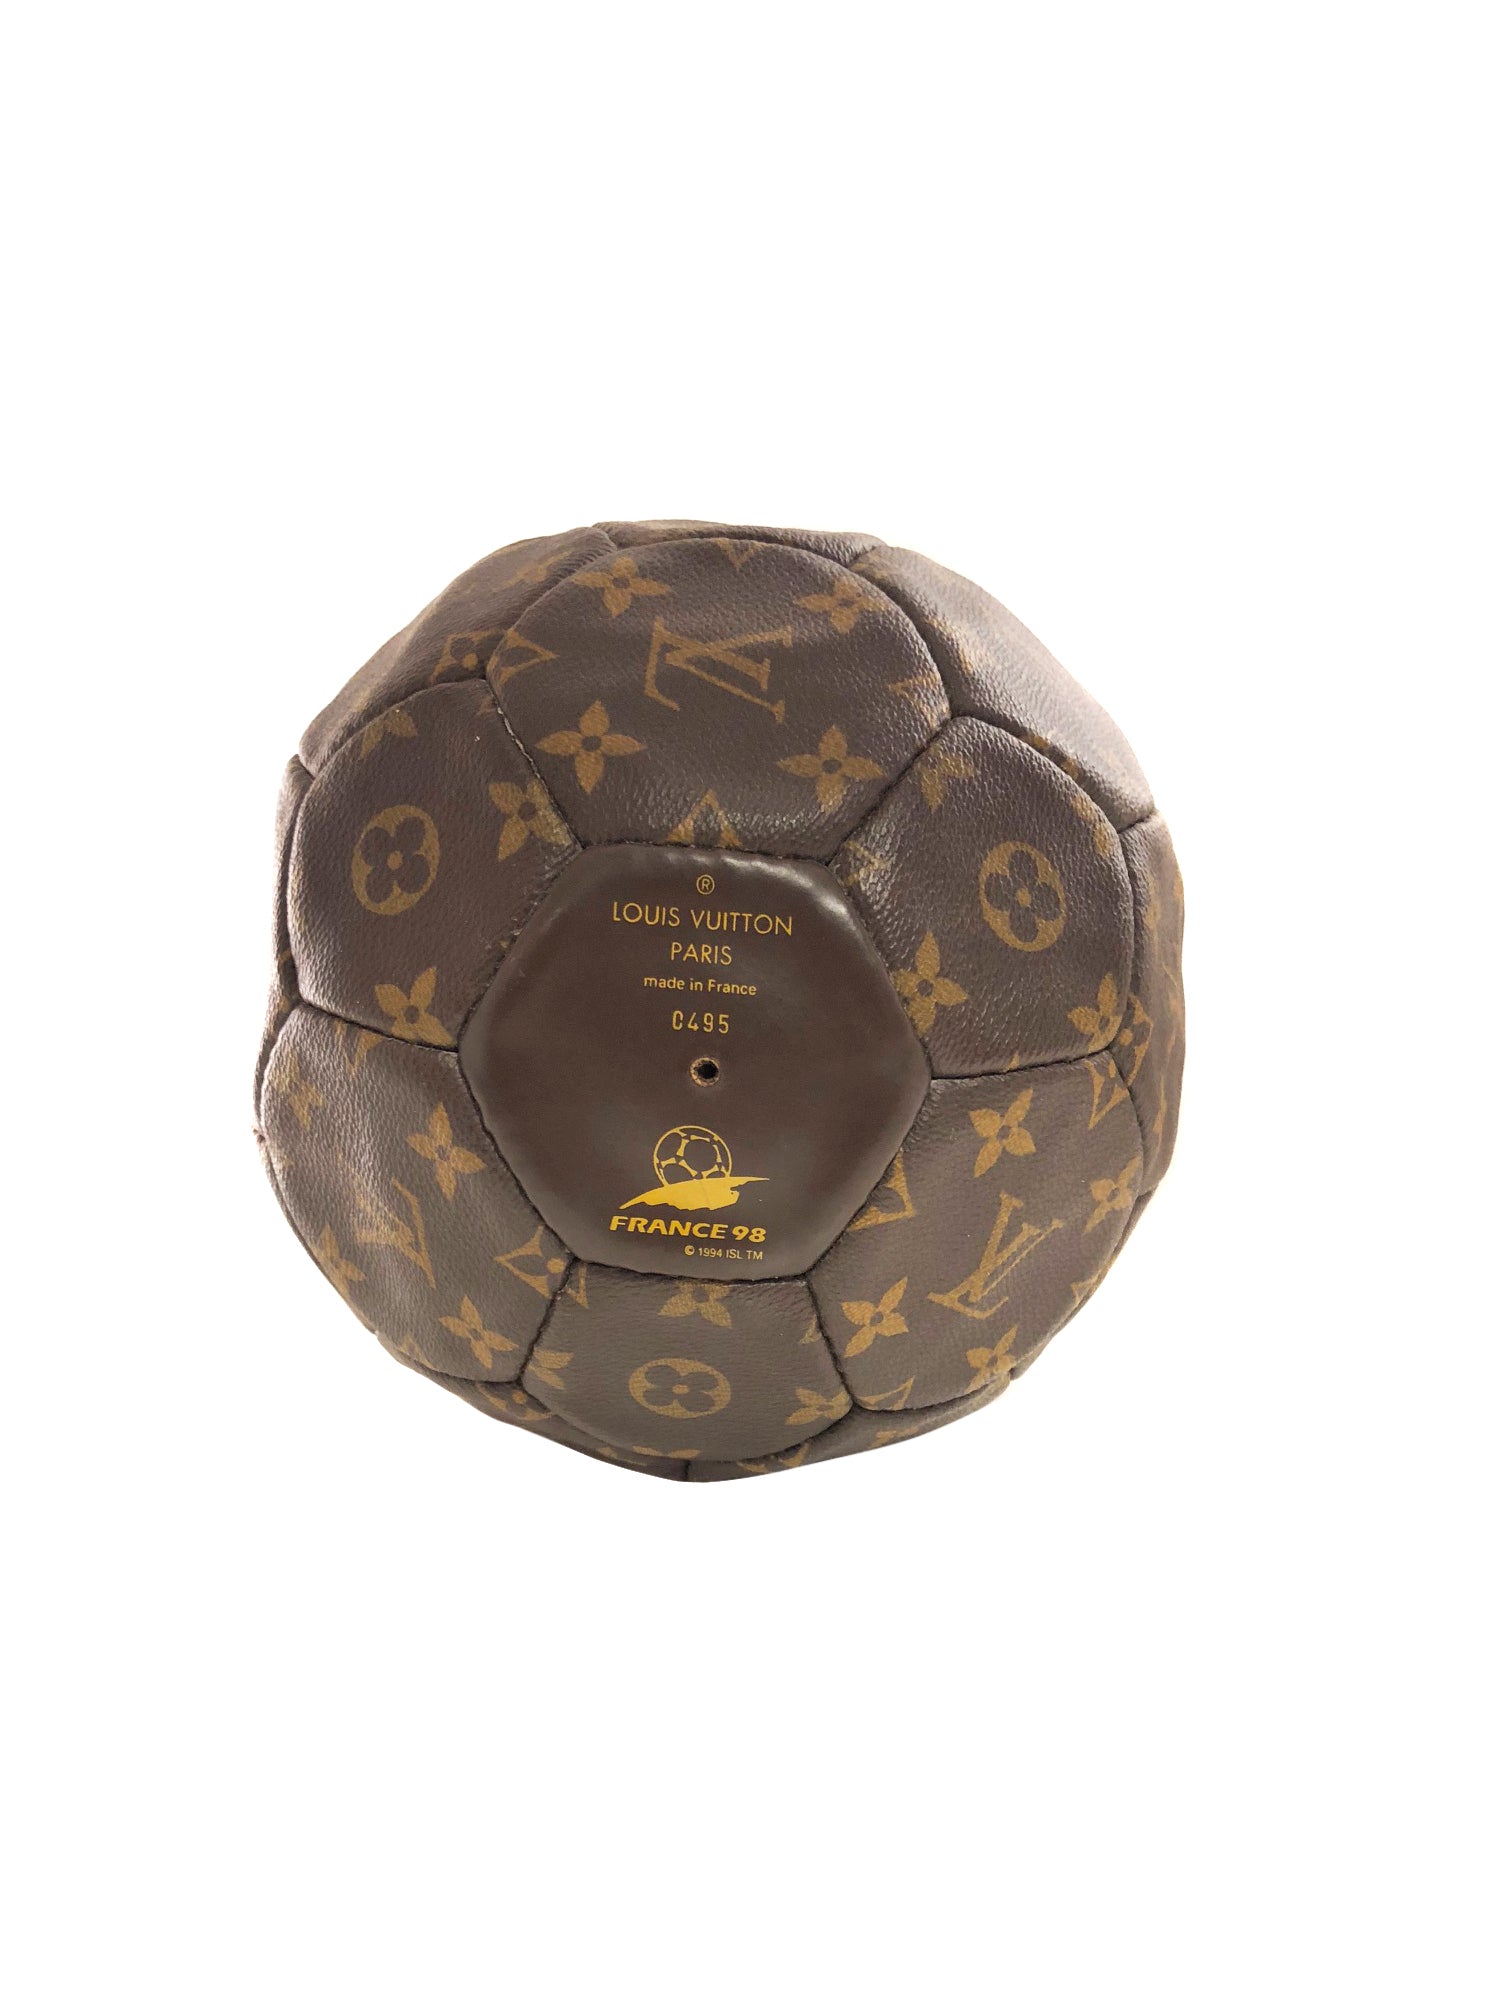 Vintage Louis Vuitton Soccer Ball - aptiques by Authentic PreOwned